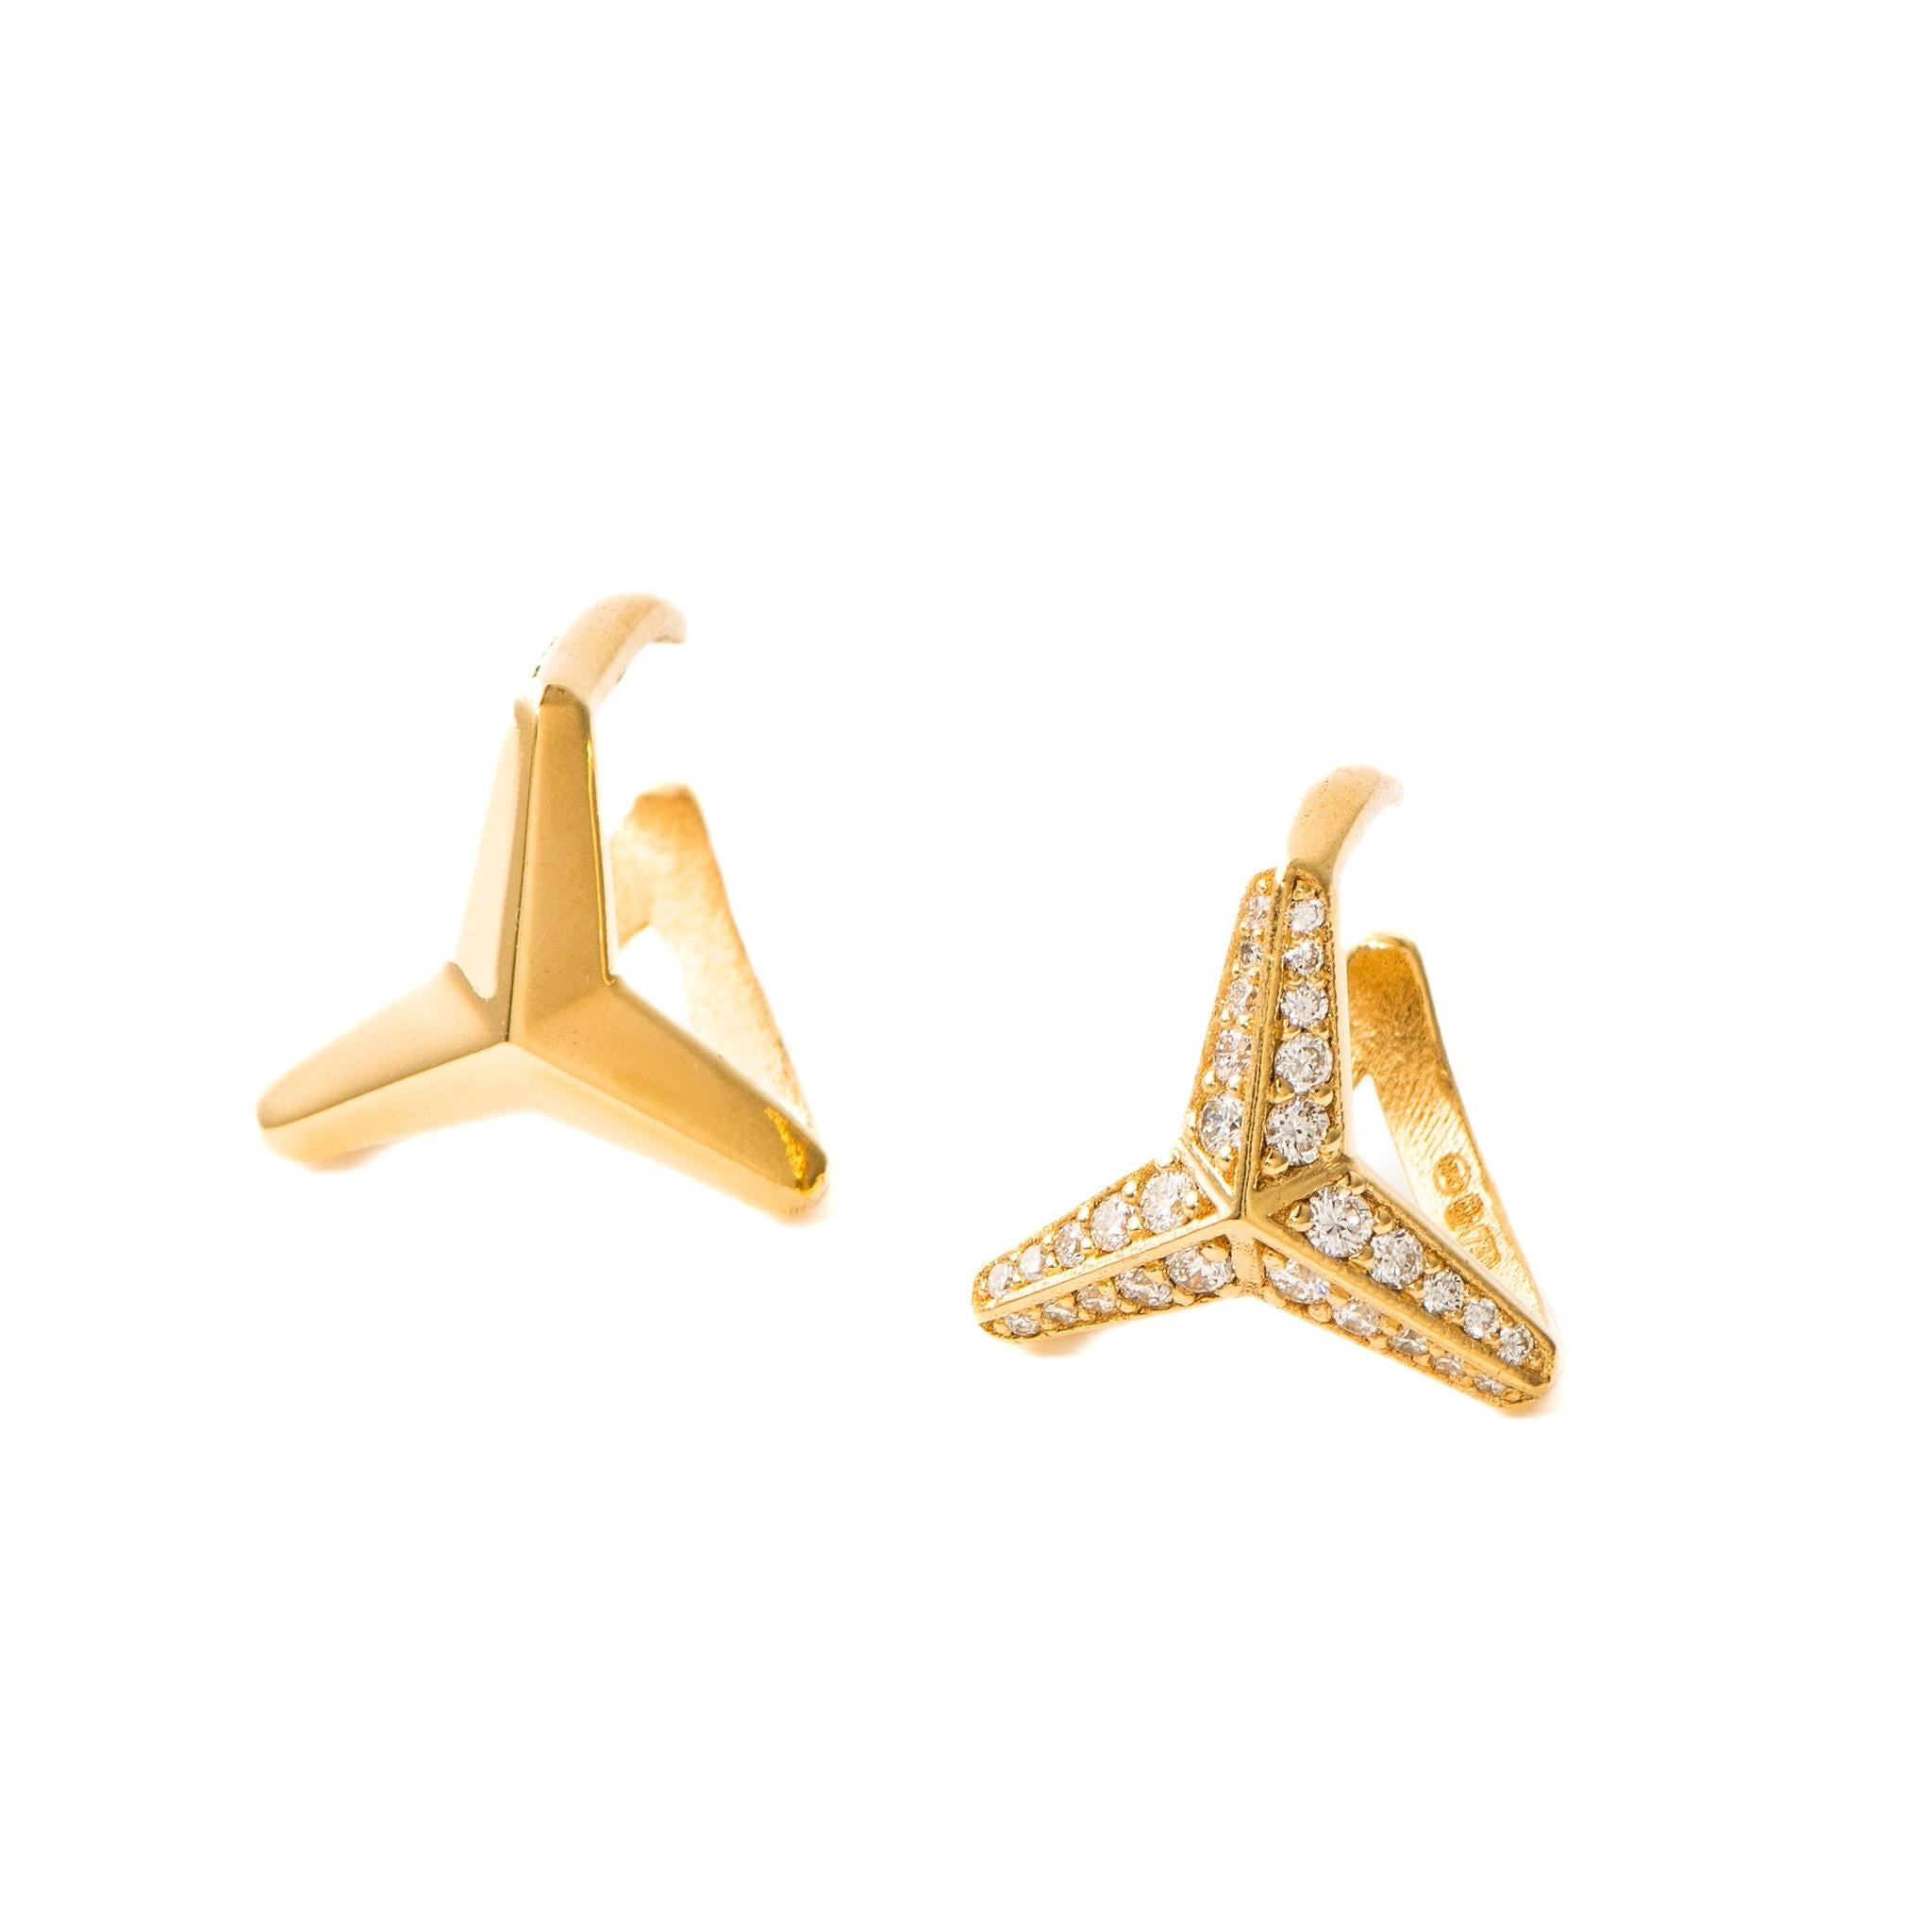 Crafted from 18K yellow gold and hallmarked in Cyprus, the Three Pointed Star small diamond ear cuff is a breathtaking accessory. This diamond ear cuff comes in a highly polished finish and is adorned with natural white diamonds that total 0.27 Cts,